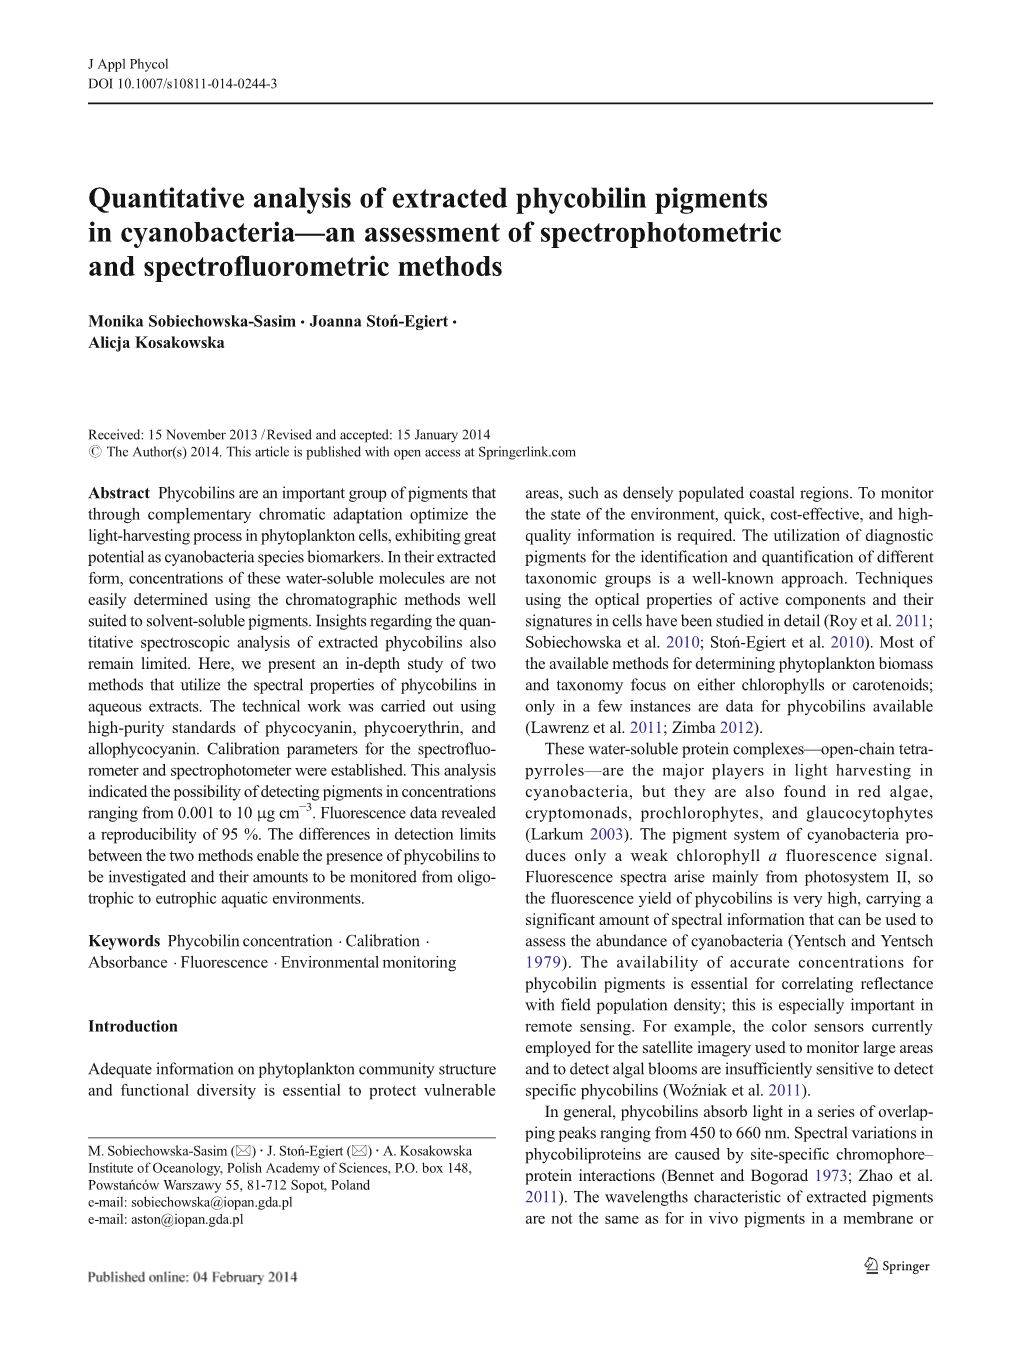 Quantitative Analysis of Extracted Phycobilin Pigments in Cyanobacteria—An Assessment of Spectrophotometric and Spectrofluorometric Methods